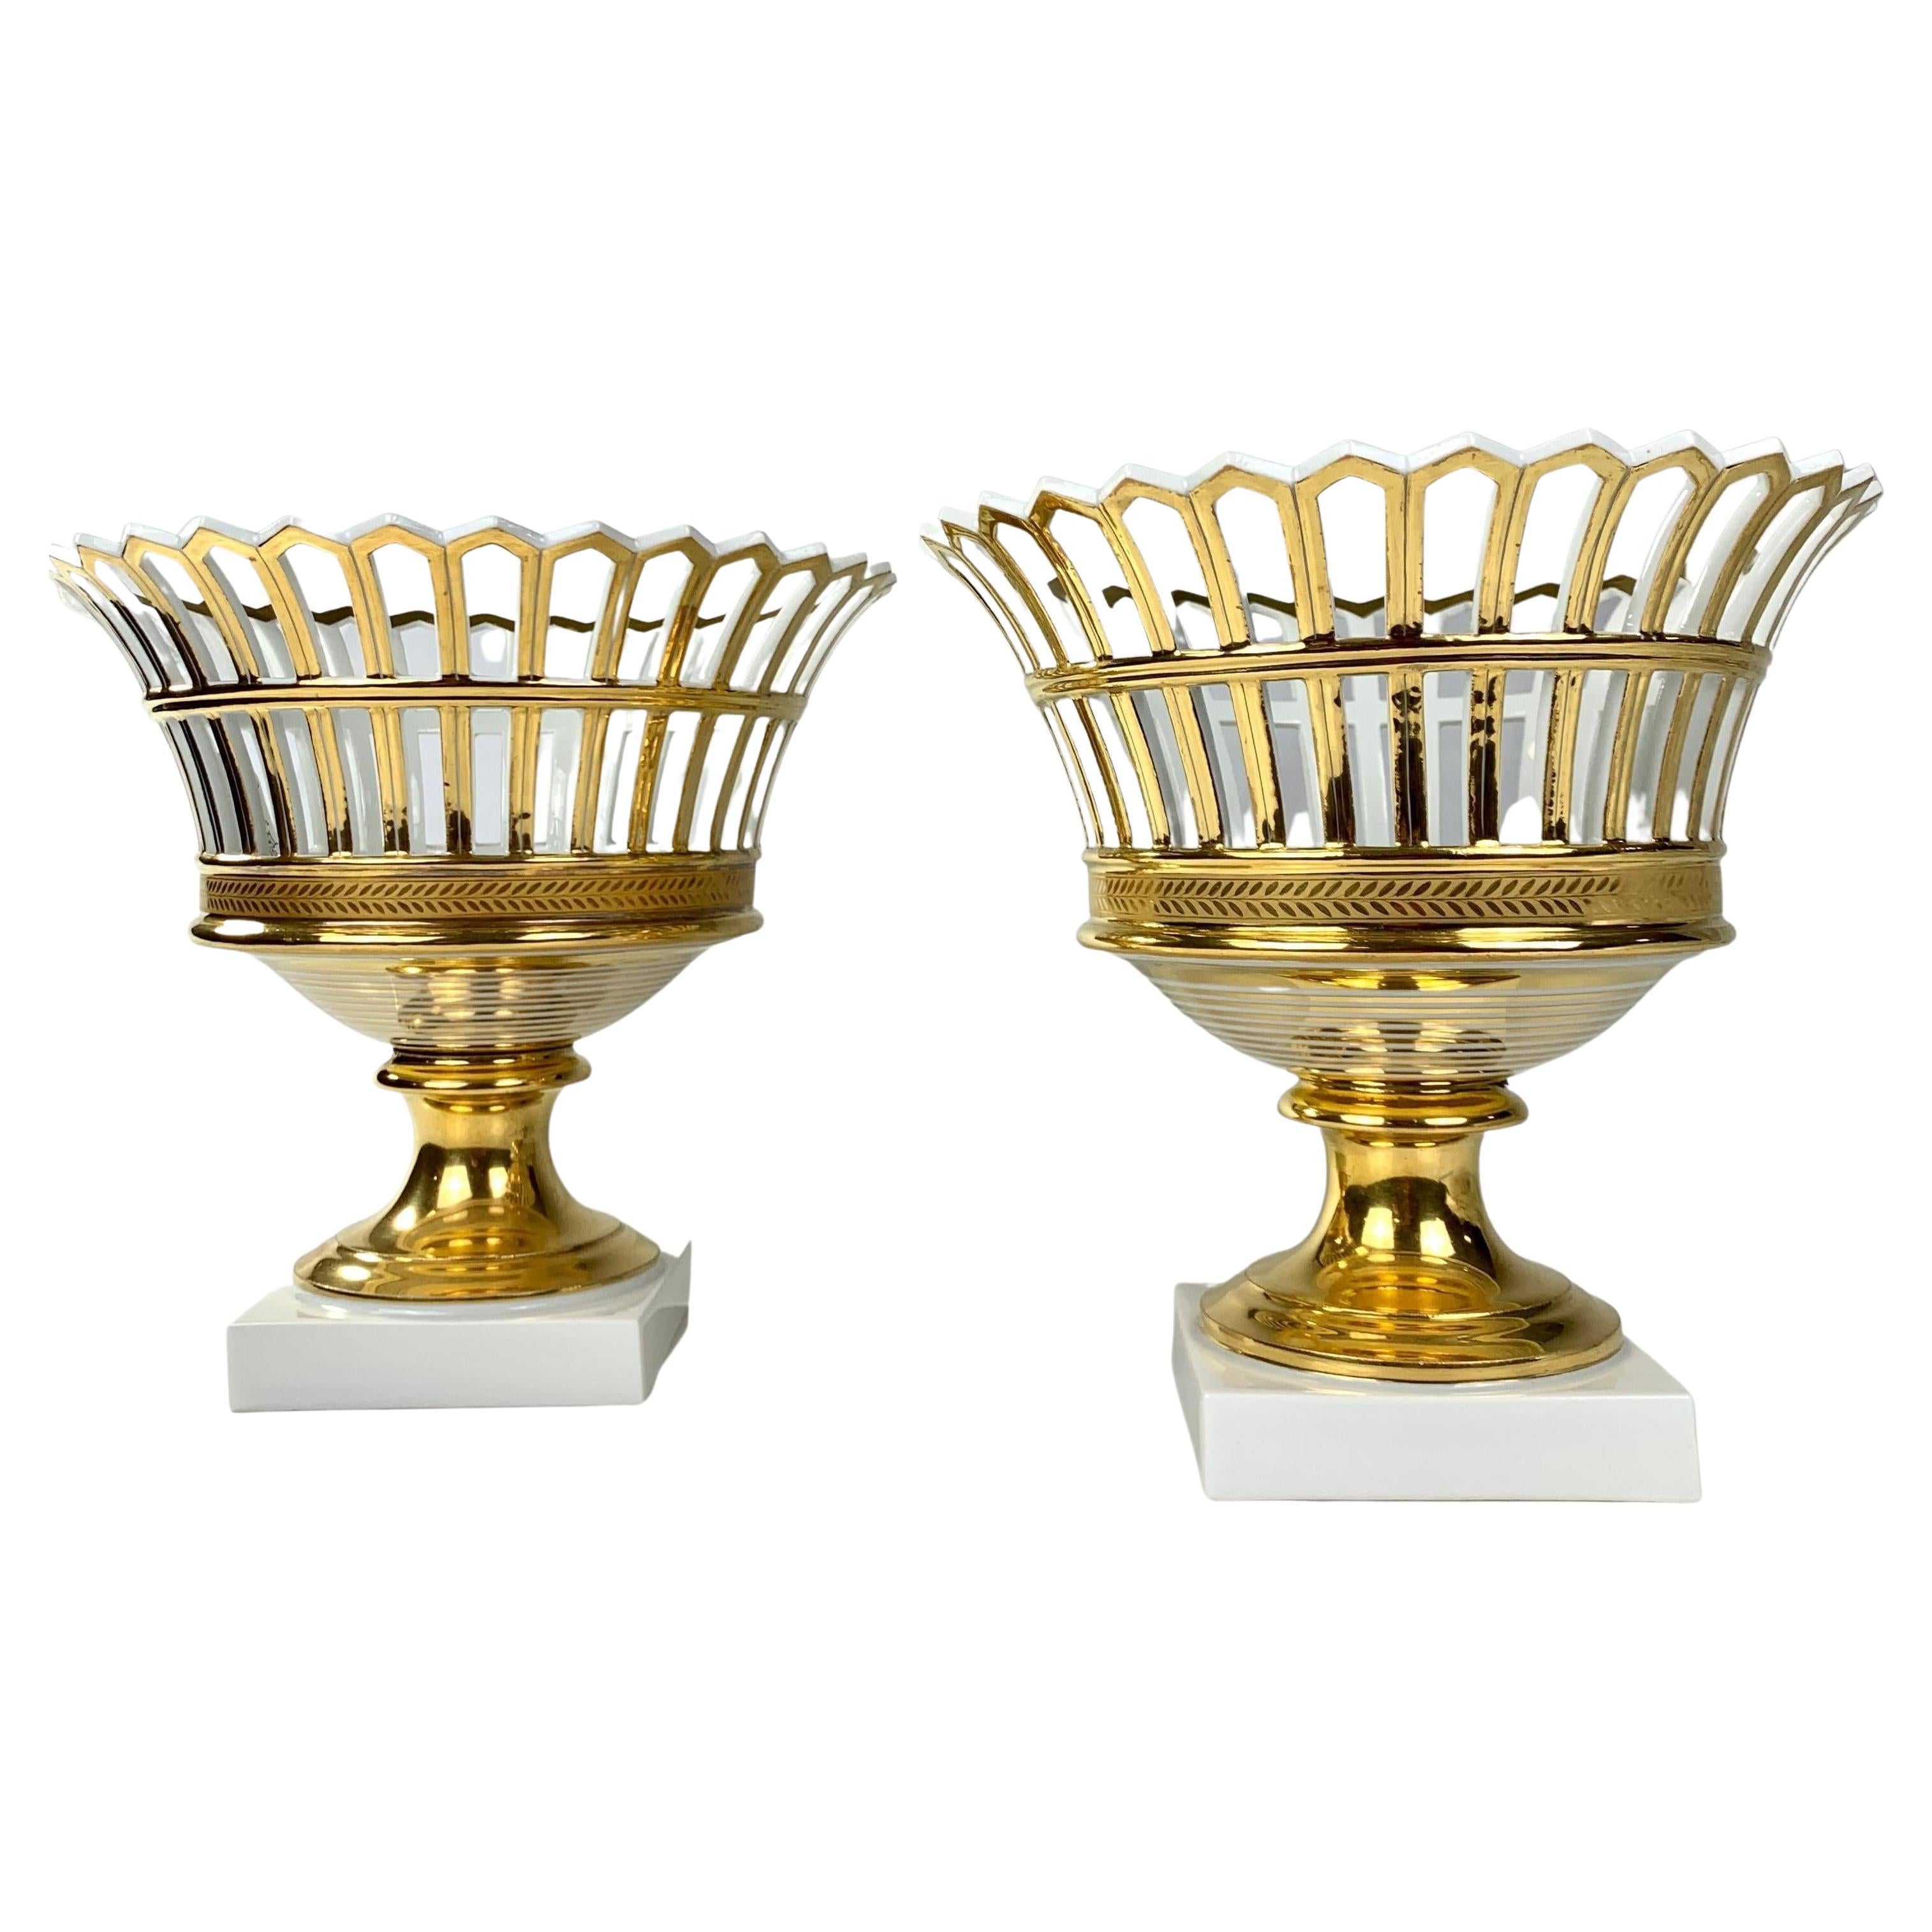 Pair of Antique French Porcelain Baskets Made Circa 1860